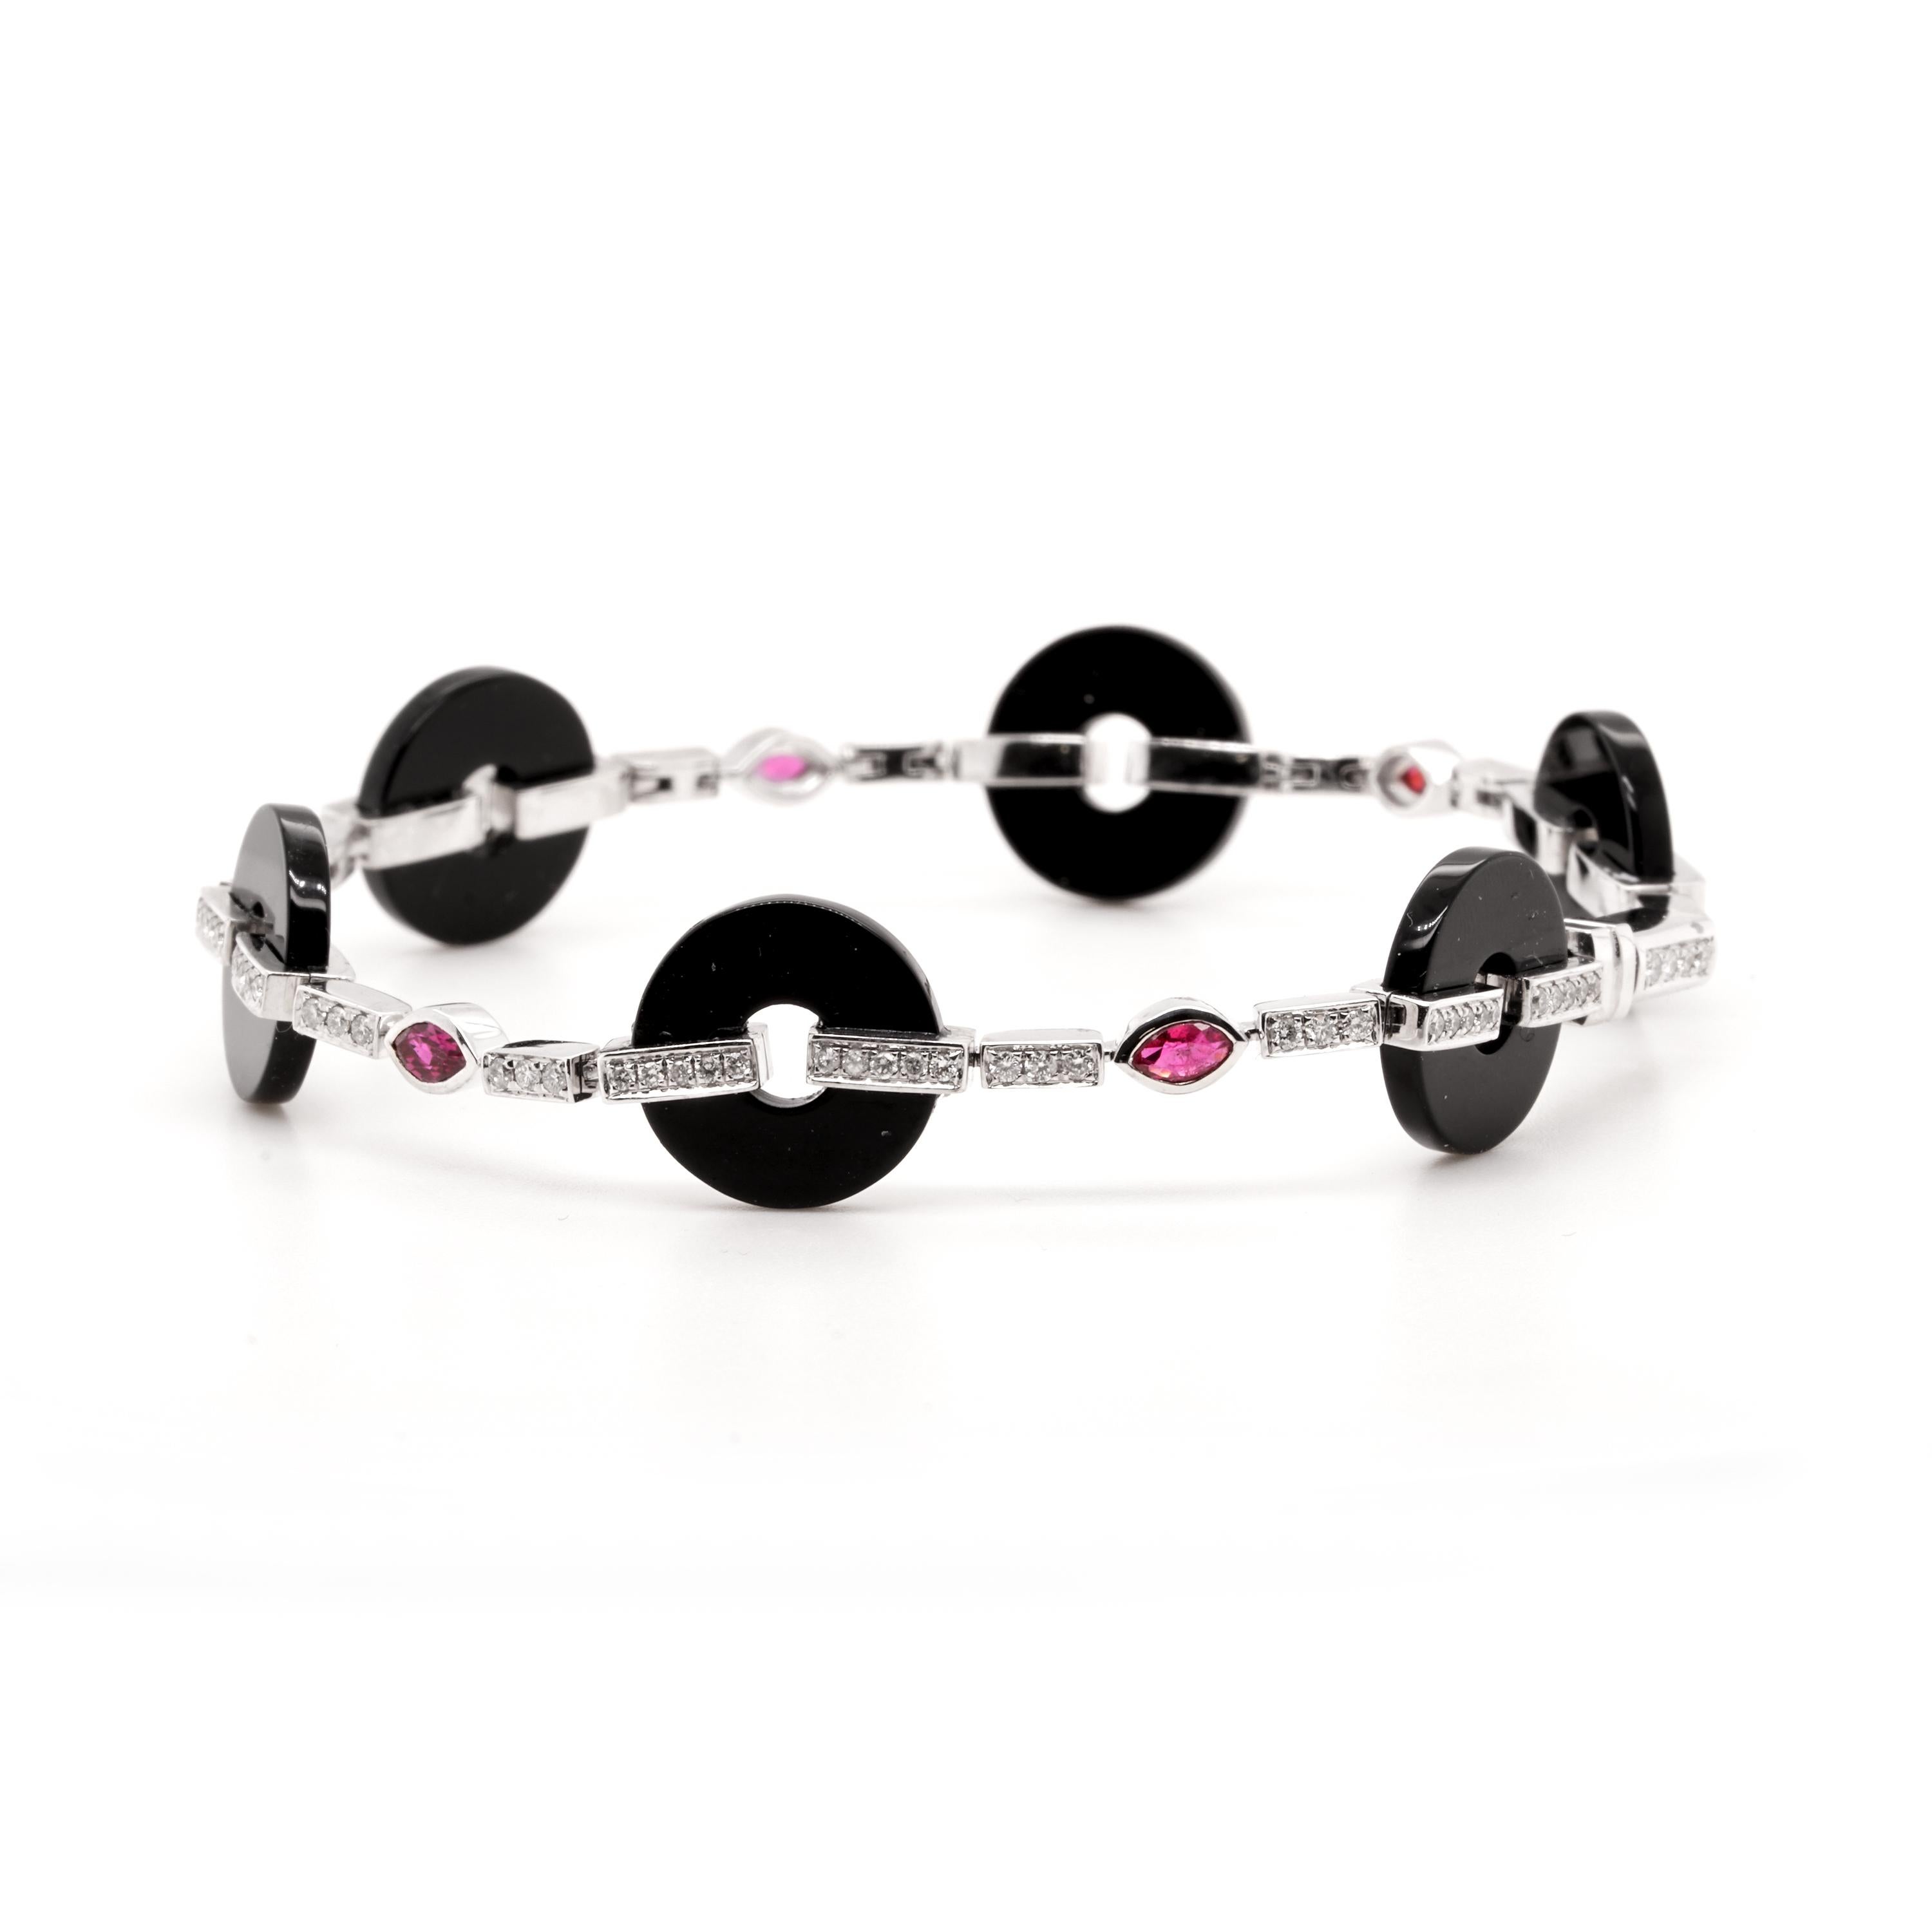 Description:
Sleek geometric lines and beautiful colour contrast. An art deco bracelet comprising circular onyx weighing a total of 14.2ct with articulated 18ct white gold embellished with diamonds and marquise cut rubies.

- Stone weights: onyx =